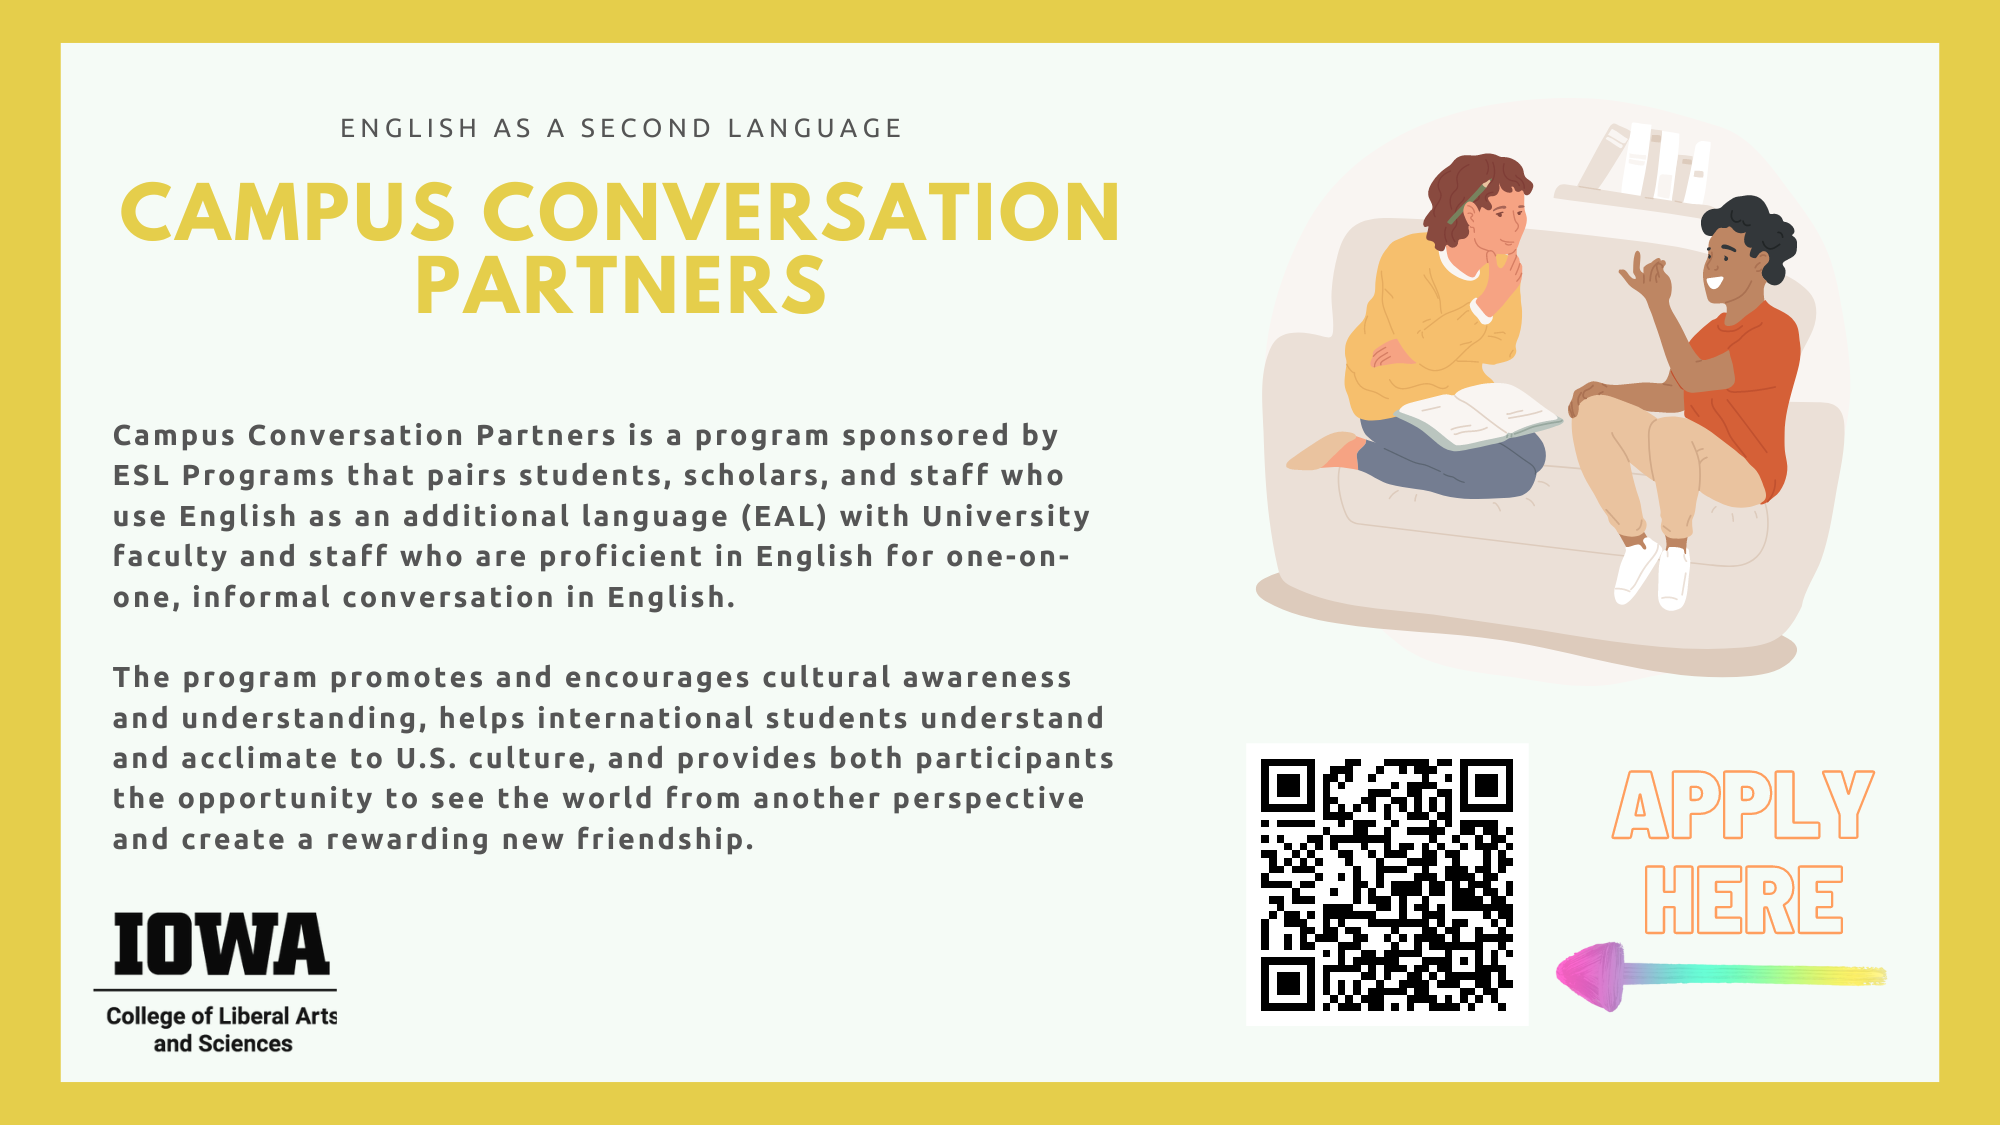 those who use English as an additional language can be paired with University faculty/staff who are proficient in English for one-on-one conversation practice